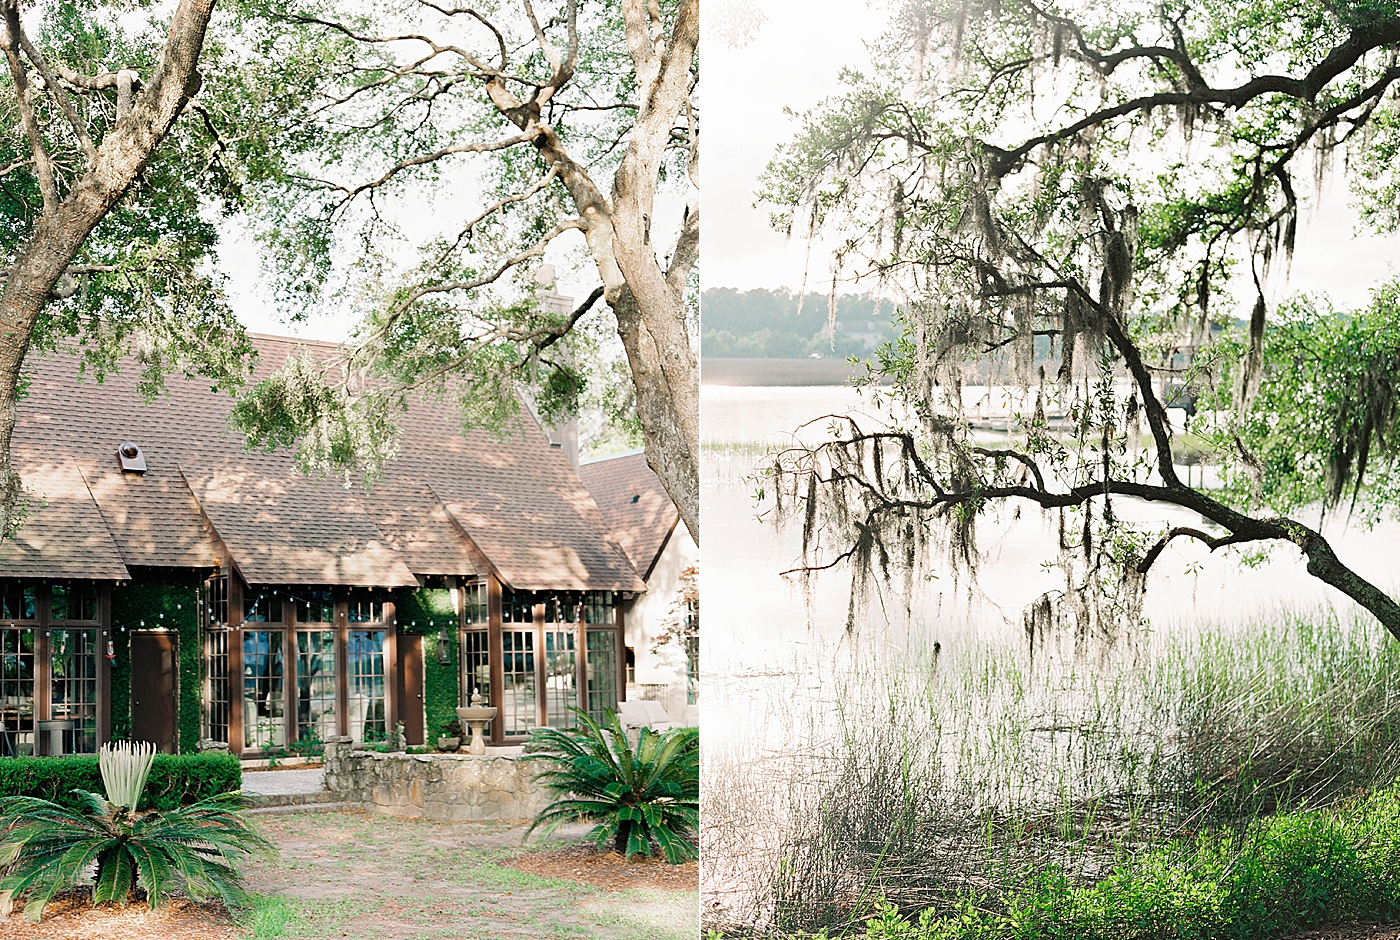 Details of home on the marsh | Charleston Photography Workshop with Carters Event Co